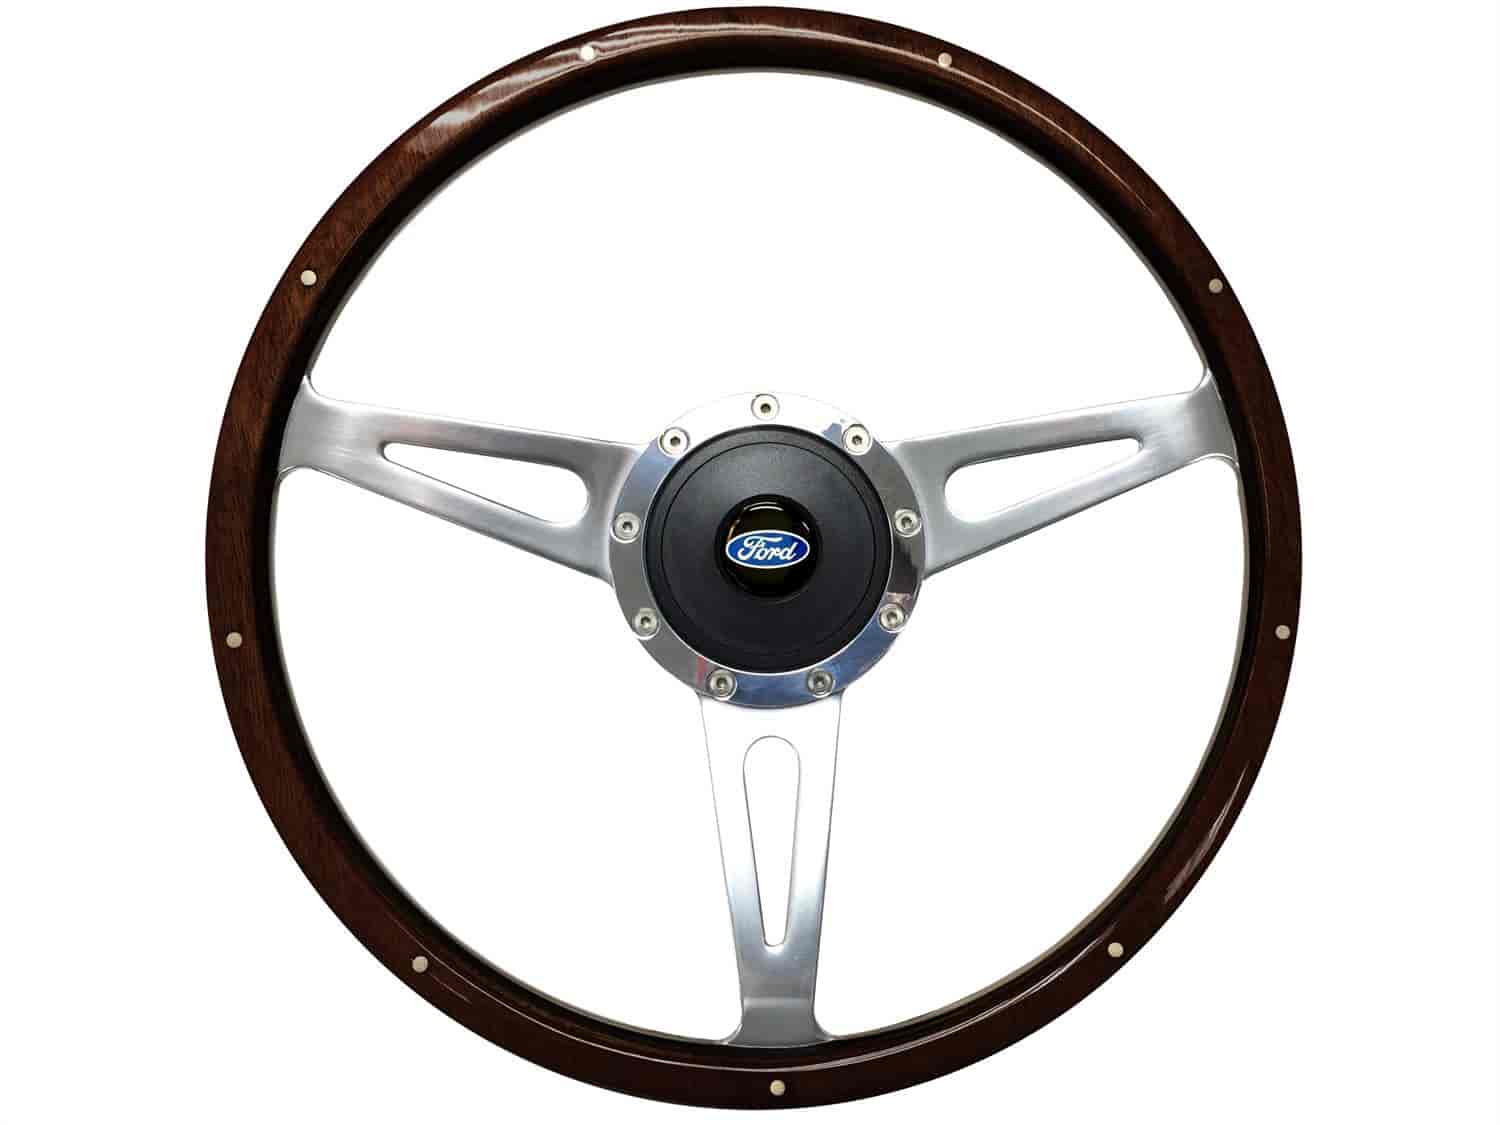 S9 Classic Steering Wheel Kit 1964-72 Ford/Mercury, 15 in. Diameter, Espresso Stained Wood Grip, w/ 9-Bolt Adapter & Horn Button